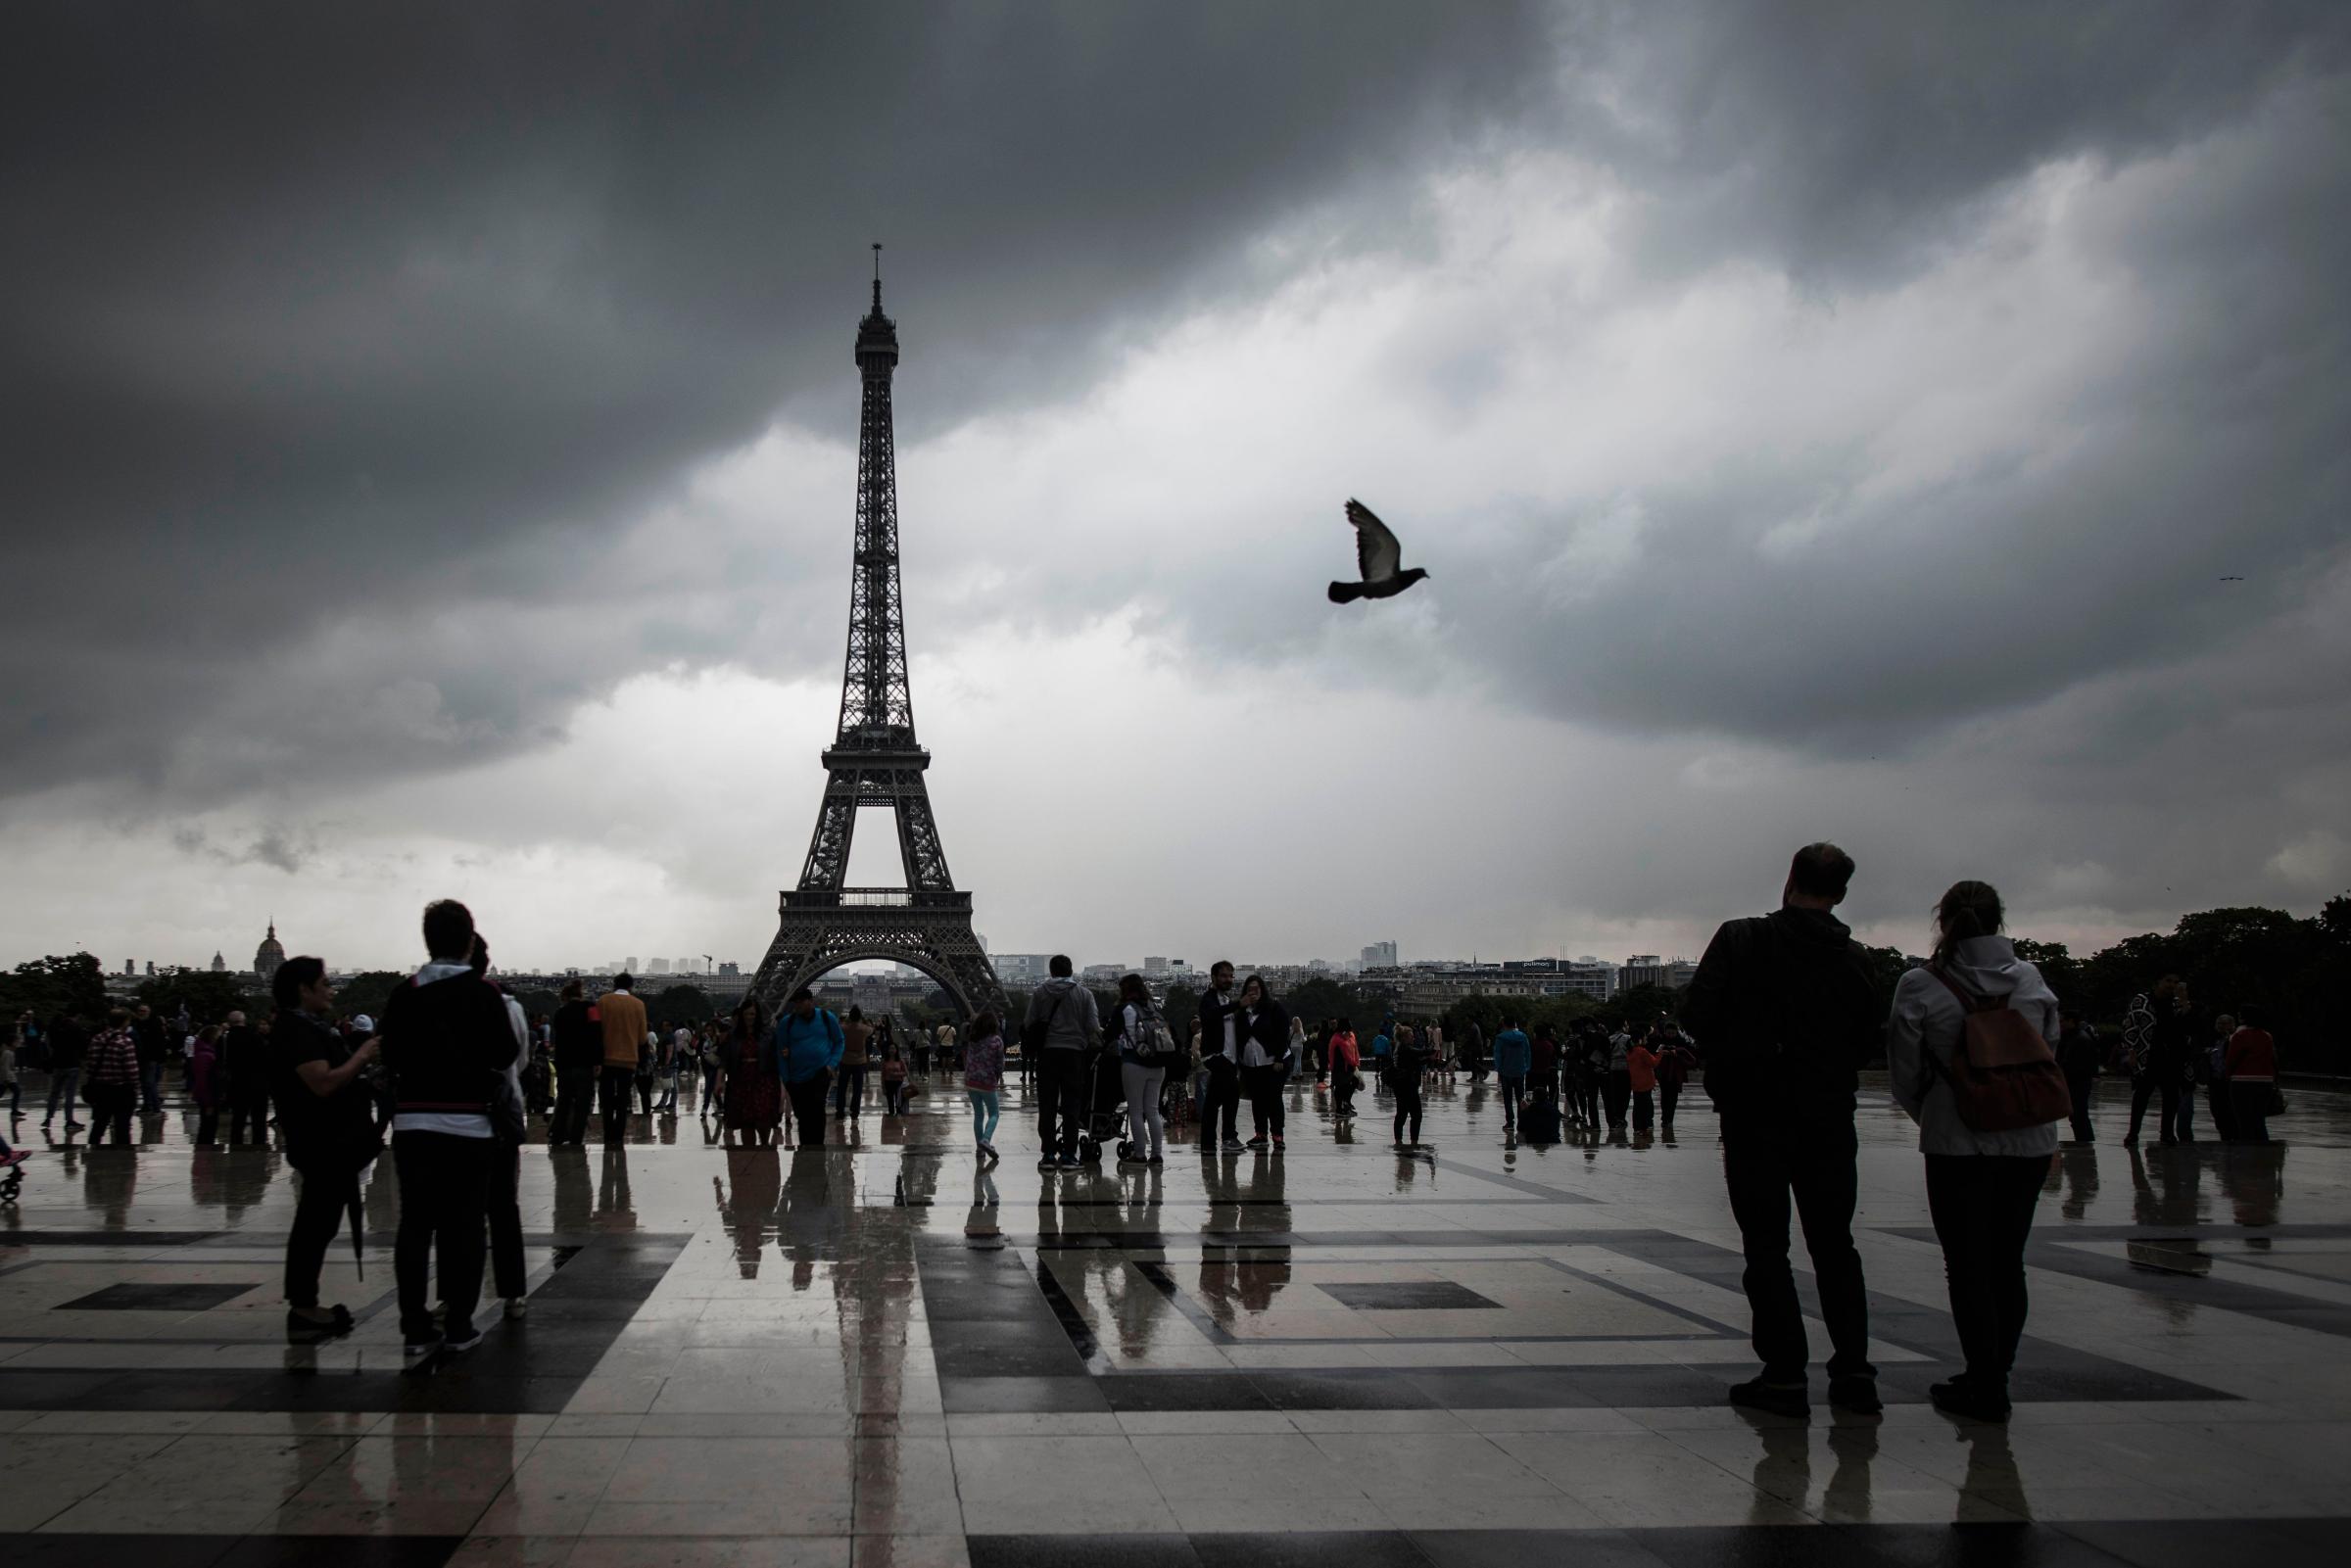 FRANCE-LIFESTYLE-LEISURE-TOURISM-WEATHER